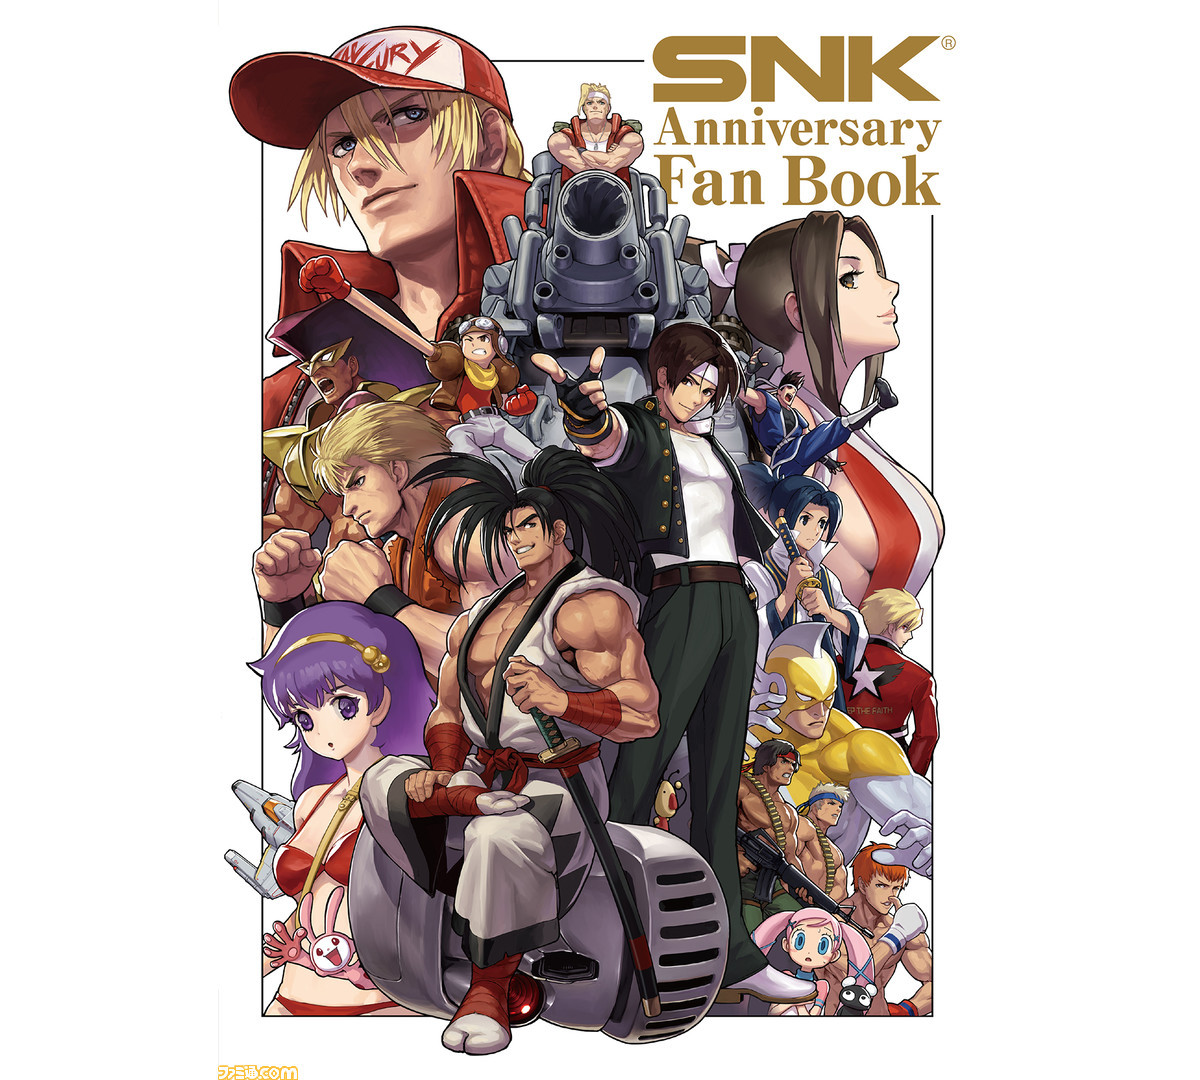 ALL ABOUT SNK SNKのすべて 2枚組DVD+rallysantafesinooficial.com